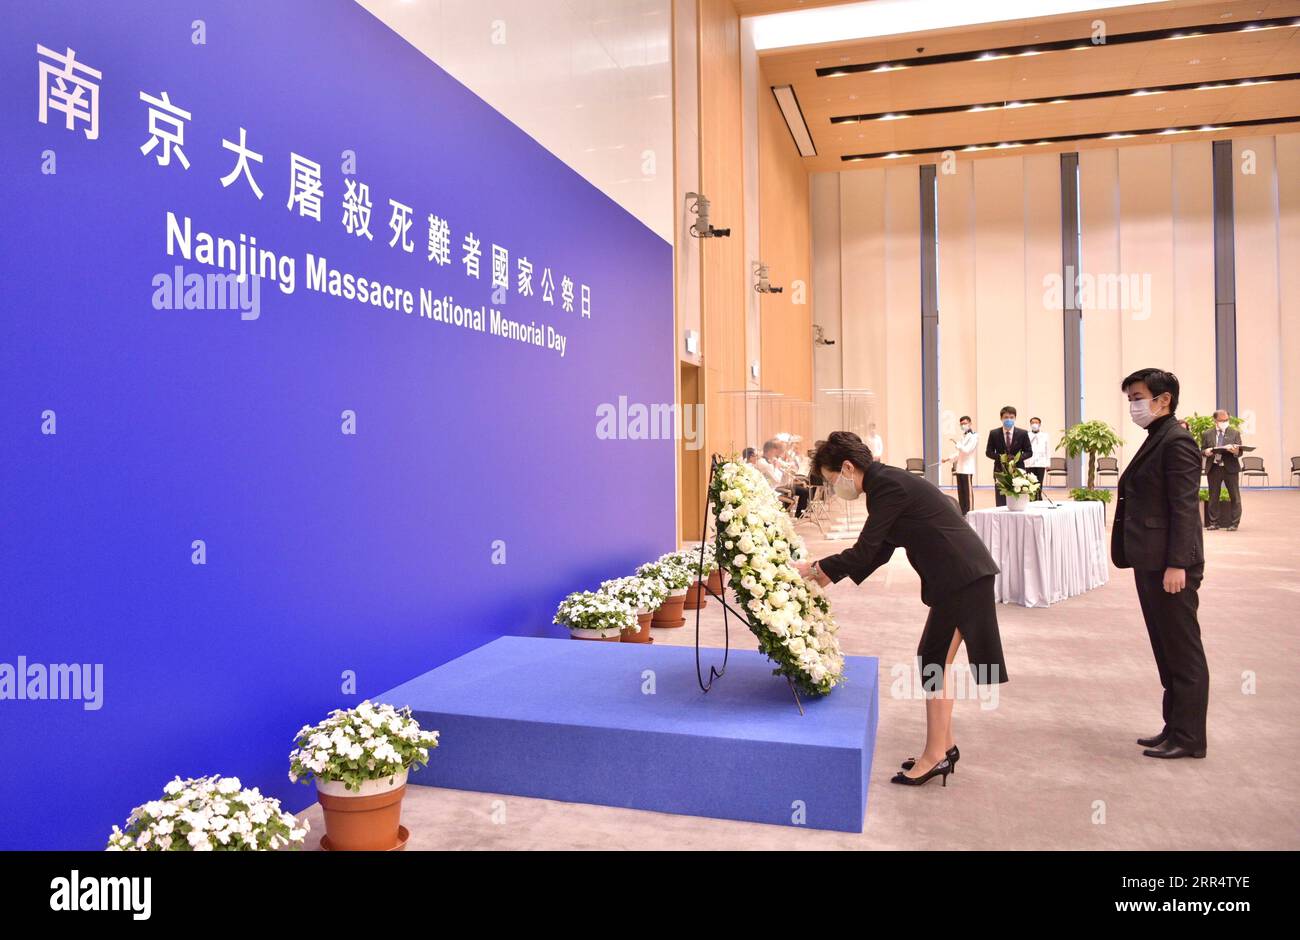 201213 -- HONG KONG, Dec. 13, 2020  -- Carrie Lam, chief executive of China s Hong Kong Special Administrative Region HKSAR, lays a wreath during a memorial ceremony to mourn the victims of the Nanjing Massacre in Hong Kong, south China, Dec. 13, 2020.  CHINA-HONG KONG-NANJING MASSACRE-COMMEMORATION CN xinhua PUBLICATIONxNOTxINxCHN Stock Photo